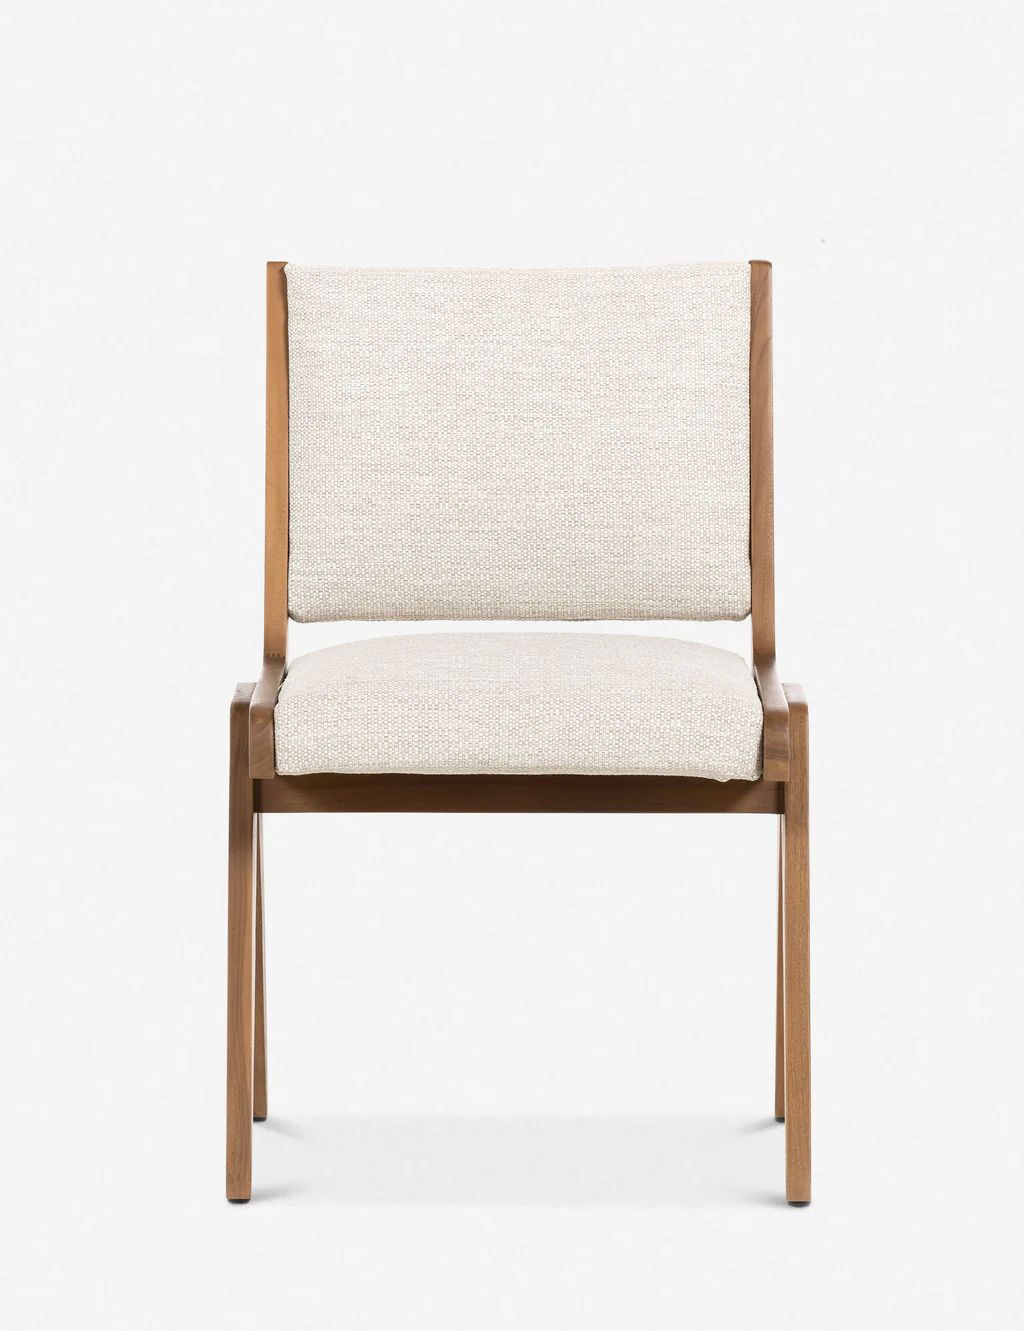 Stevie Indoor / Outdoor Dining Chair | Lulu and Georgia 